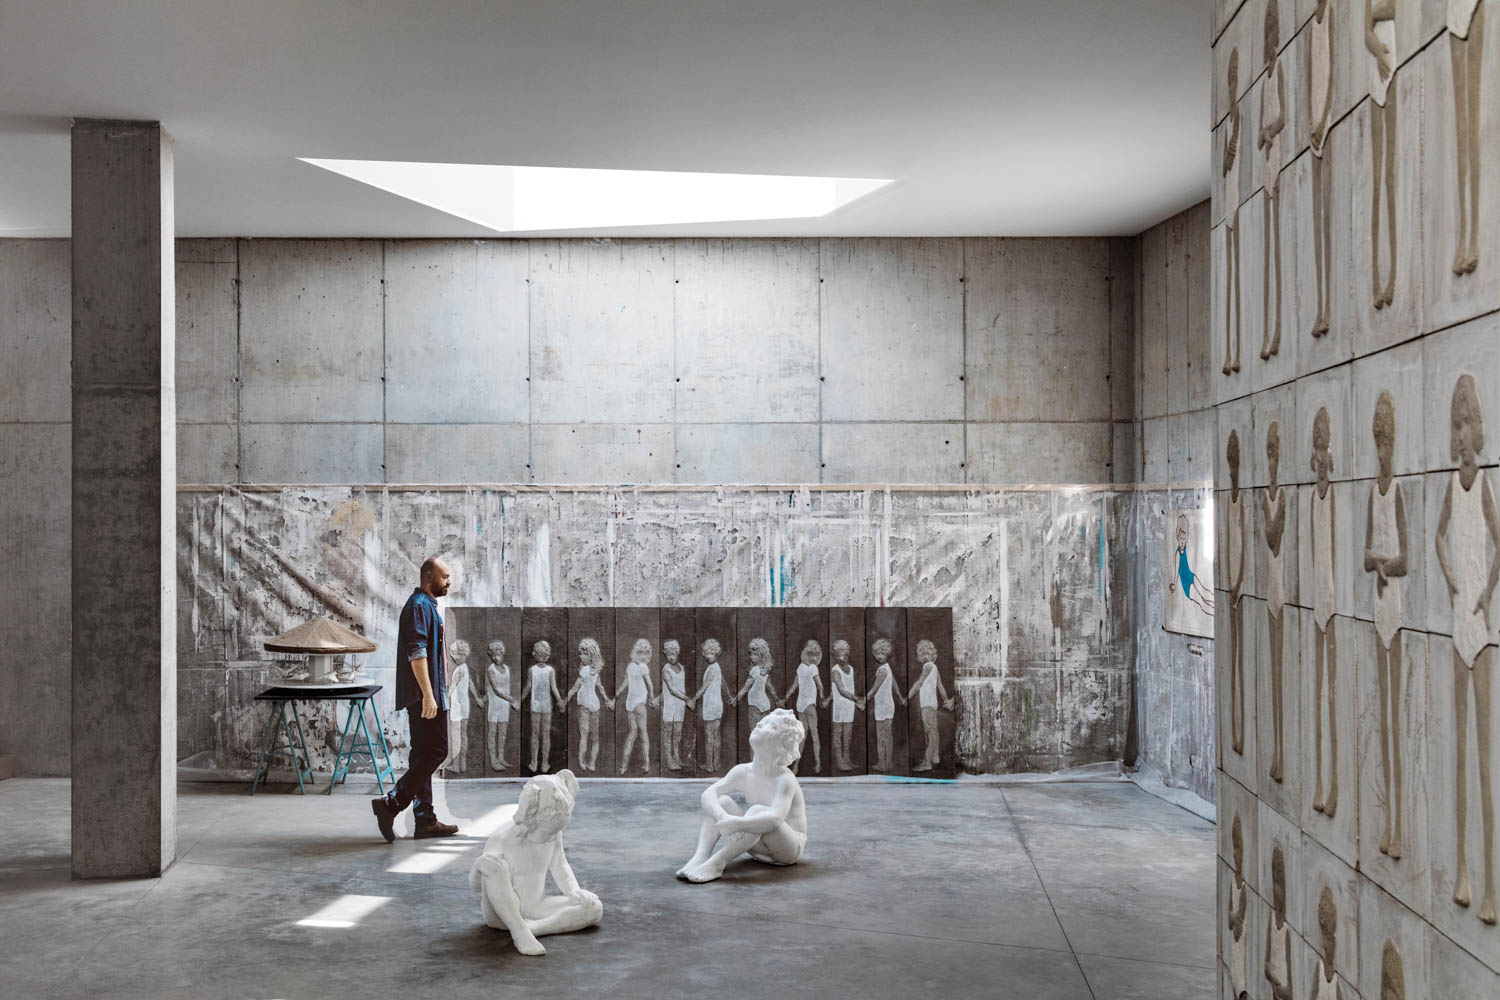 Paneling and flooring of cast on-site concrete surround the atelier portion of the home and studio of artist Valerio Berruti, who’s over­looking his polystyrene sculptures representing his two children, Nina and Zeno, a ground-up project in Alba, Italy, by SBGA | Blengini Ghirardelli.